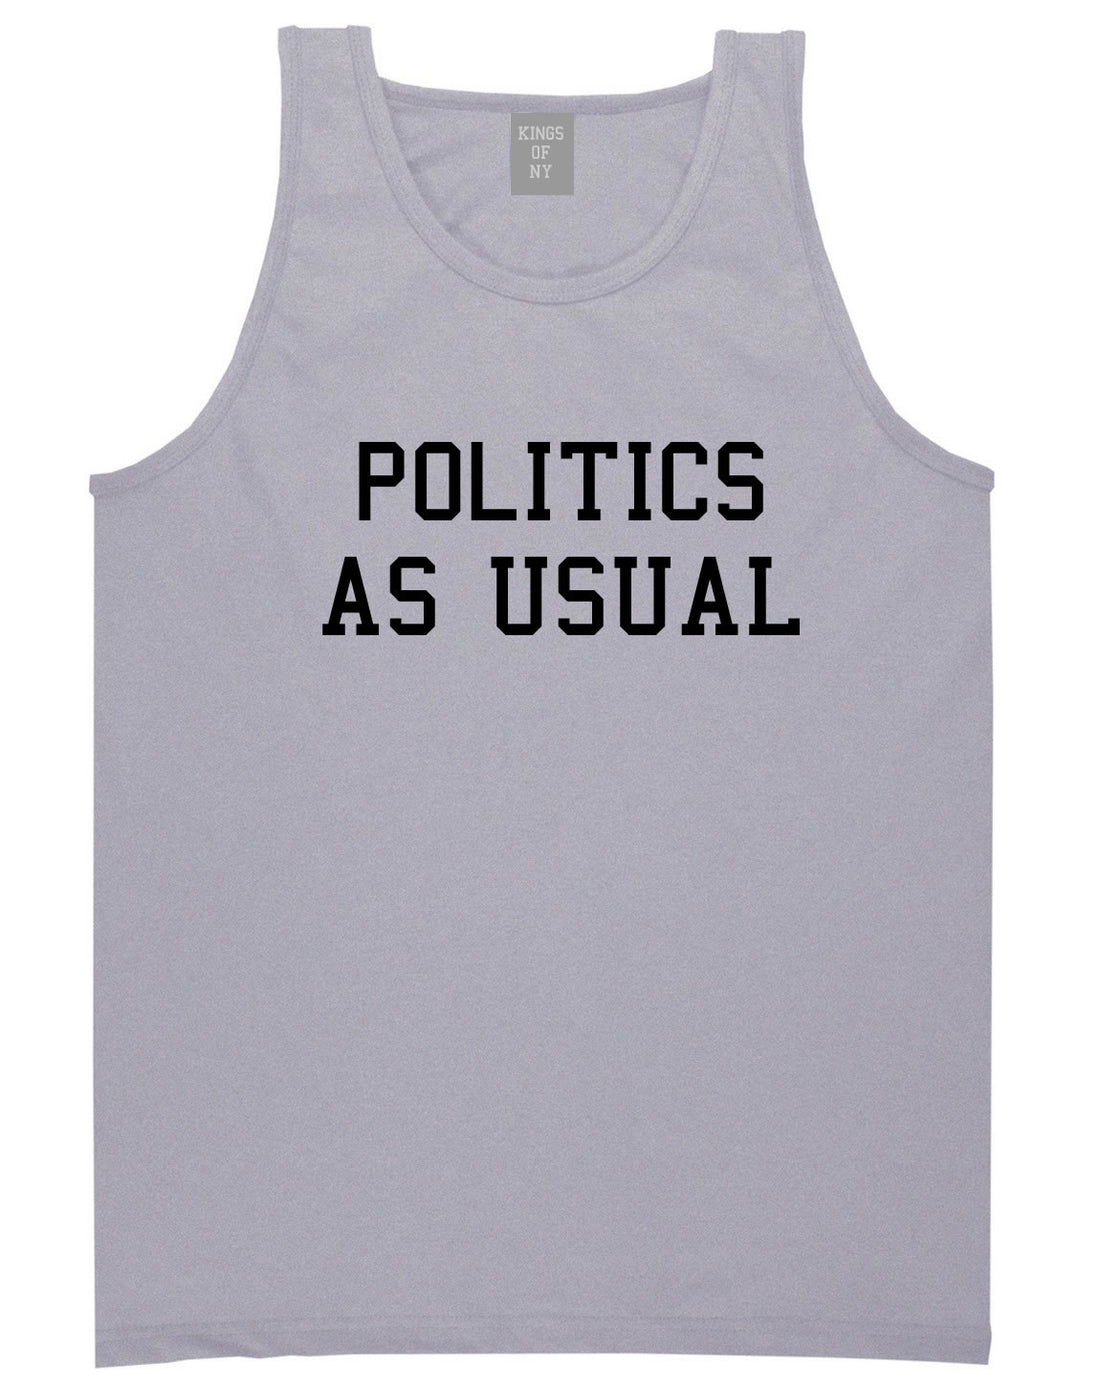 Politics As Usual Hiphop Lyrics Jay 23 Z Old School Tank Top In Grey by Kings Of NY